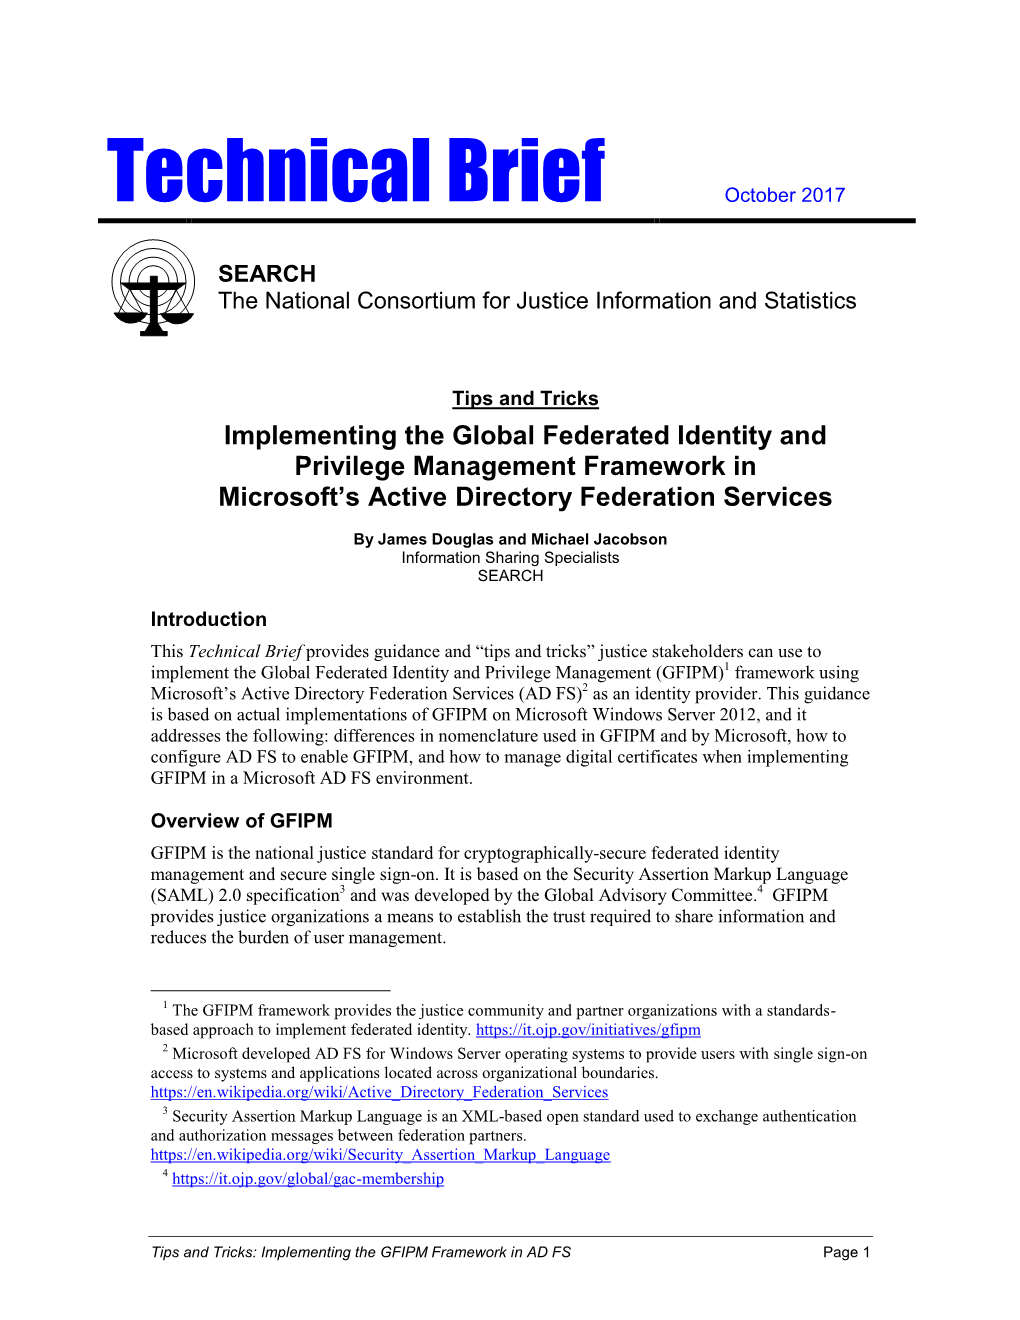 Technical Brief: Tips and Tricks–Implementing the GFIPM